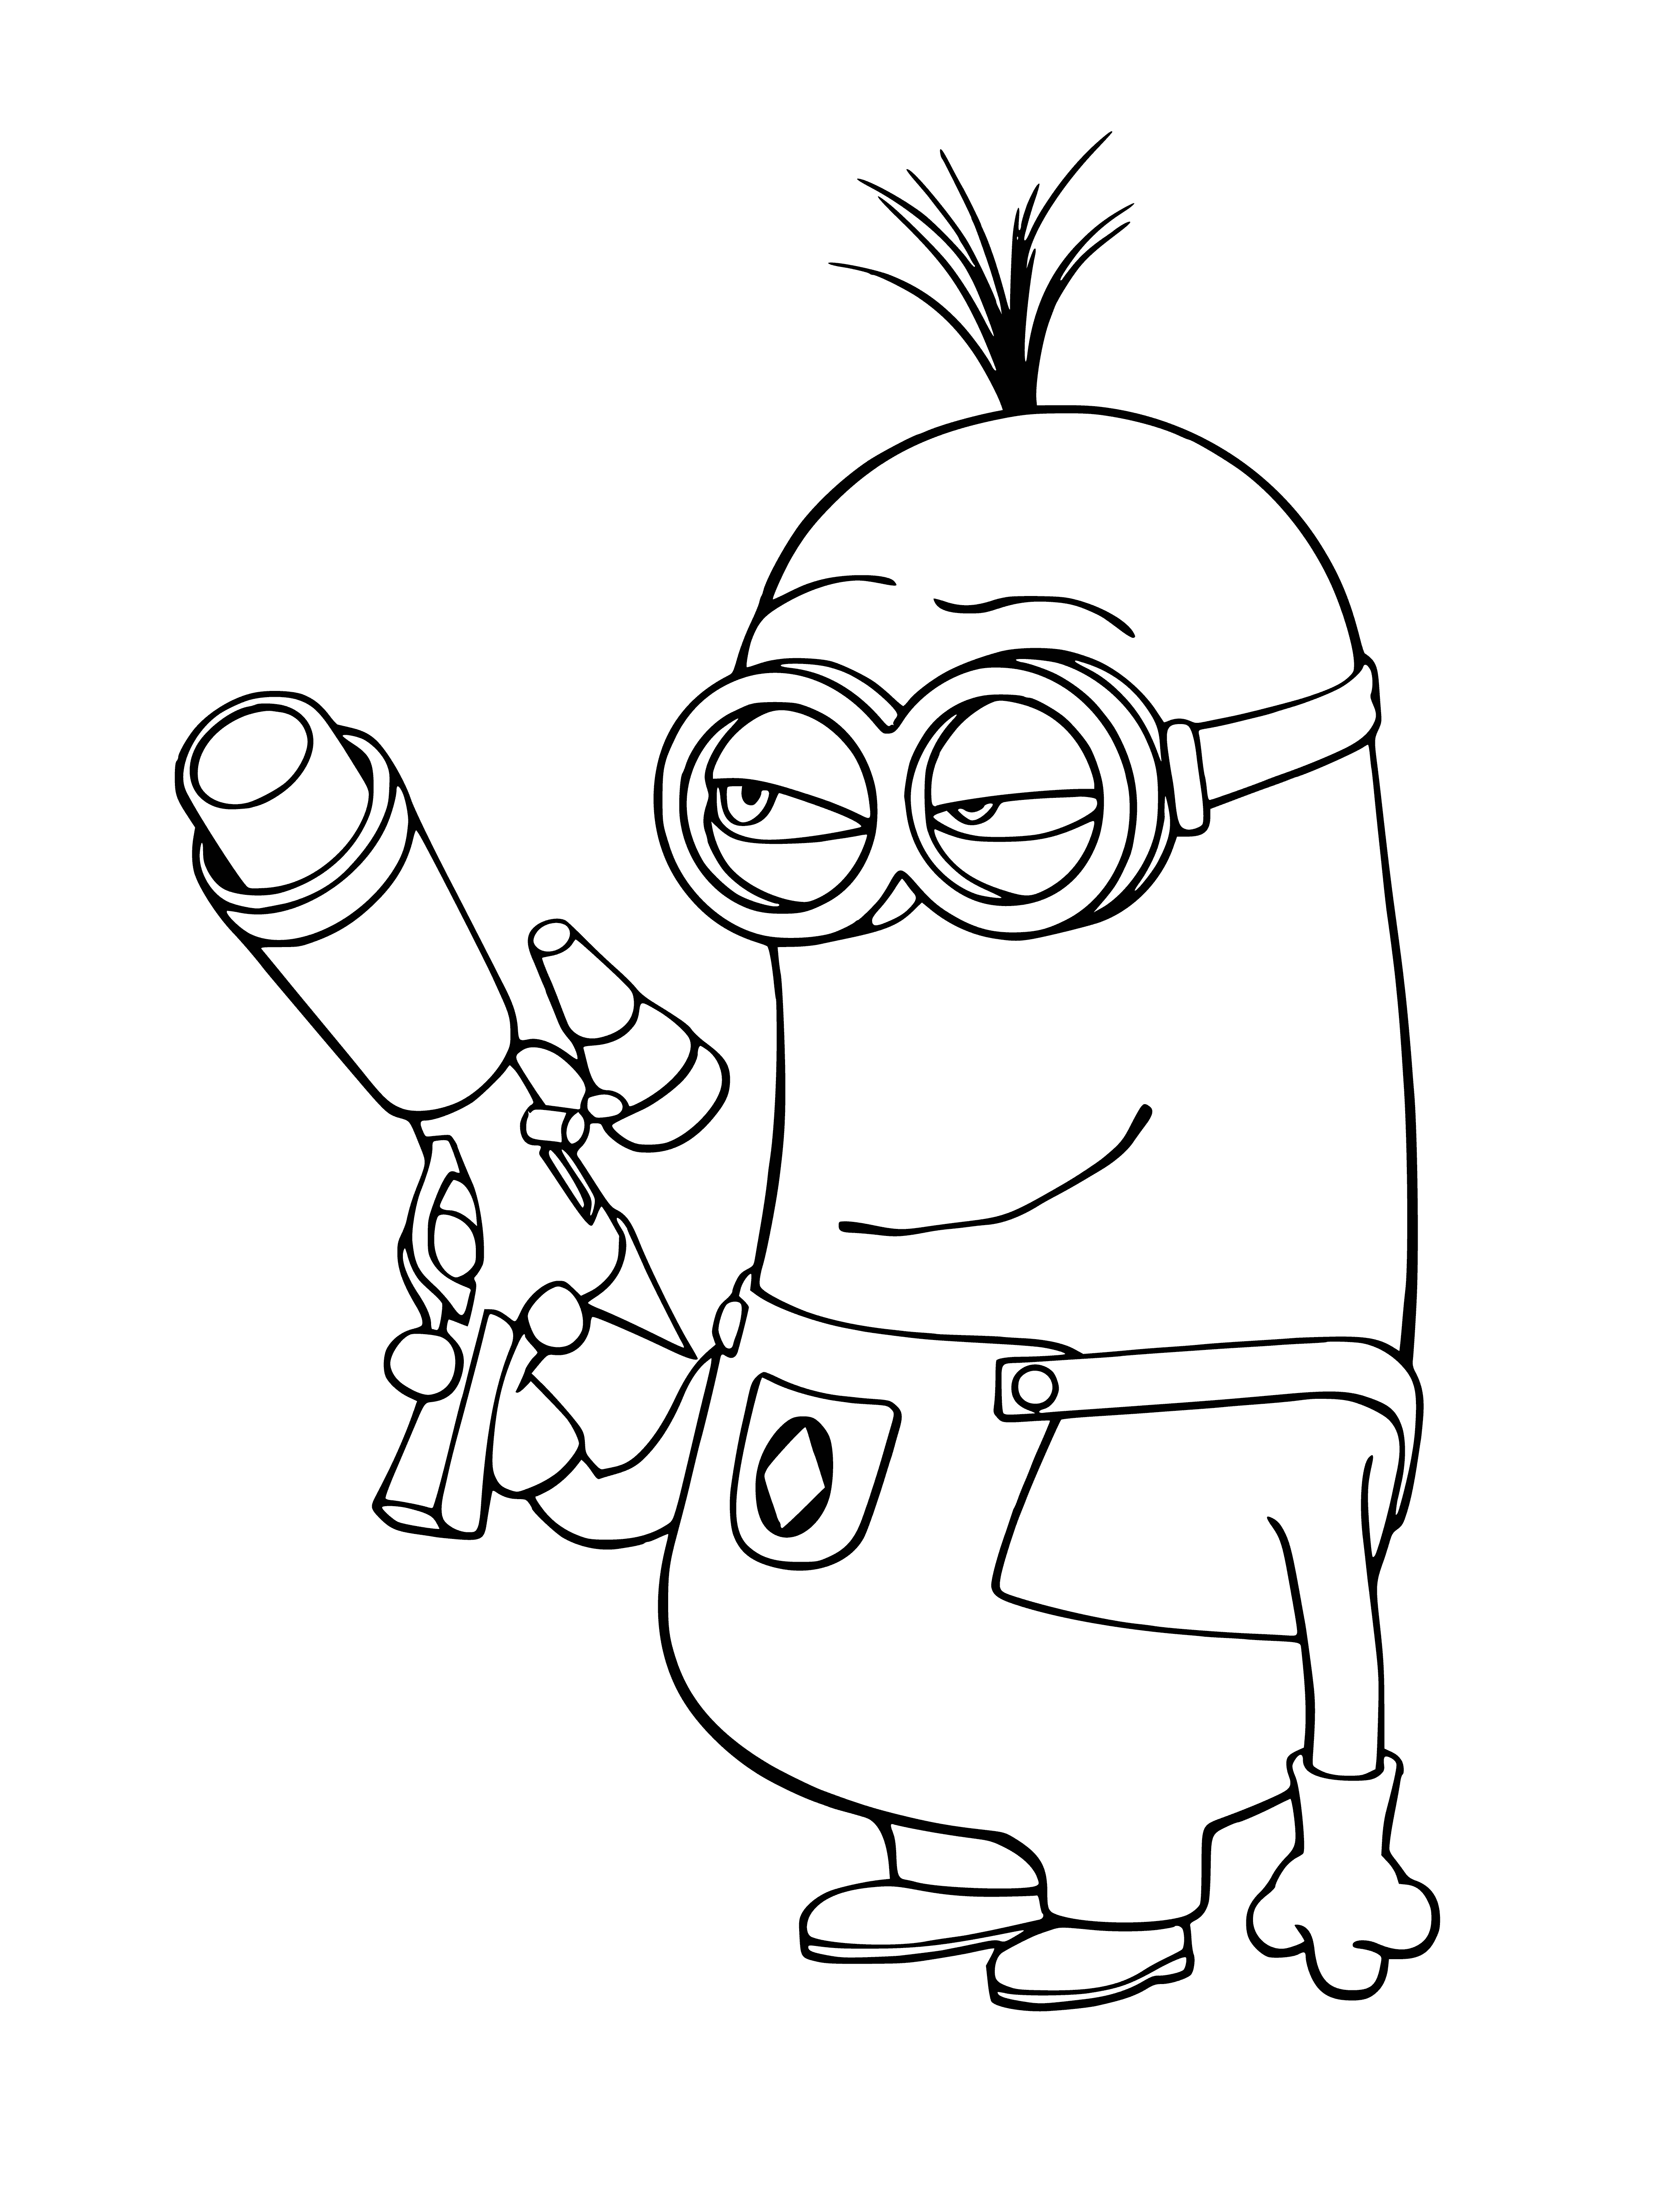 coloring page: Small, fluffy minion happily eating a banana is shown on a fun coloring page with big blue eyes.